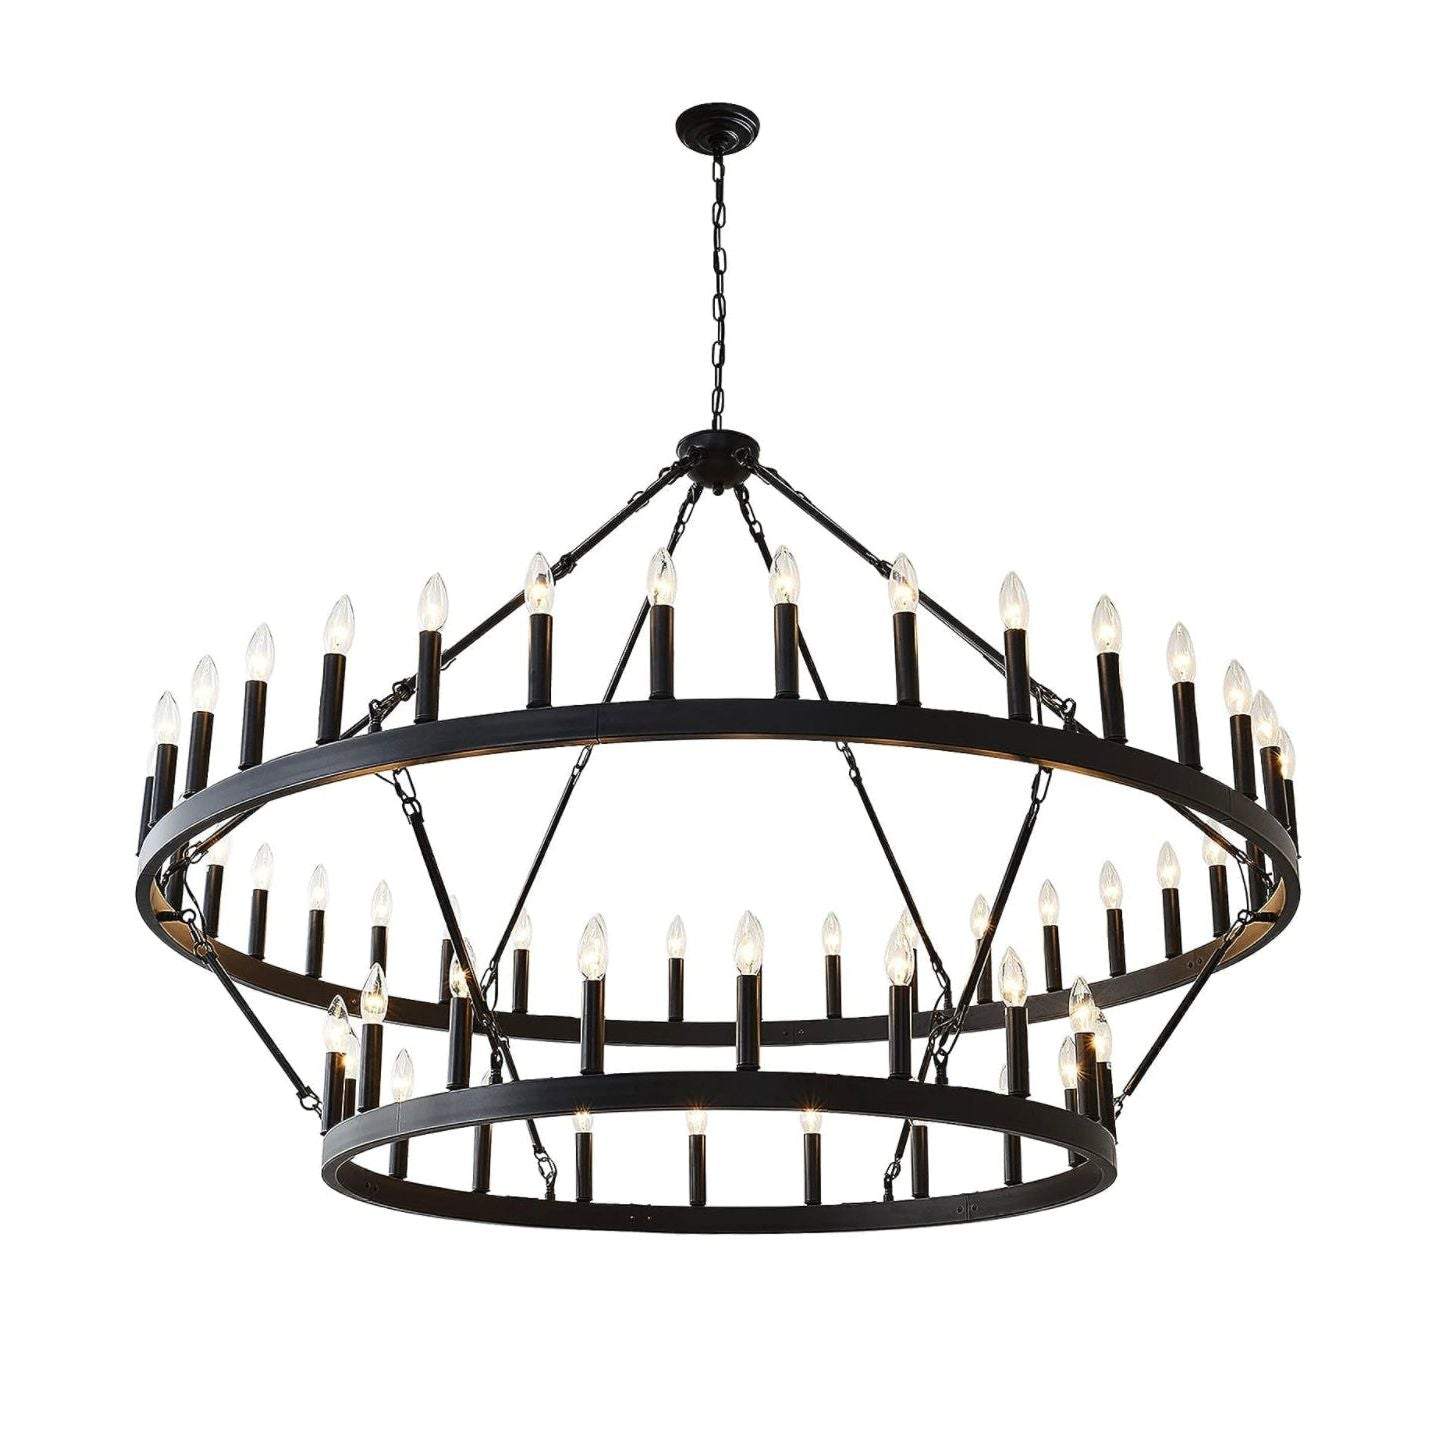 Yikrfiae Black Wagon Wheel Chandelier 2 Tier 54-Lights 60 Inch Extra Large Farmhouse Pendant Light Fixture, Round Rustic Hanging Lighting for Dining Room Kitchen Island Foyer Entryway - Selzalot